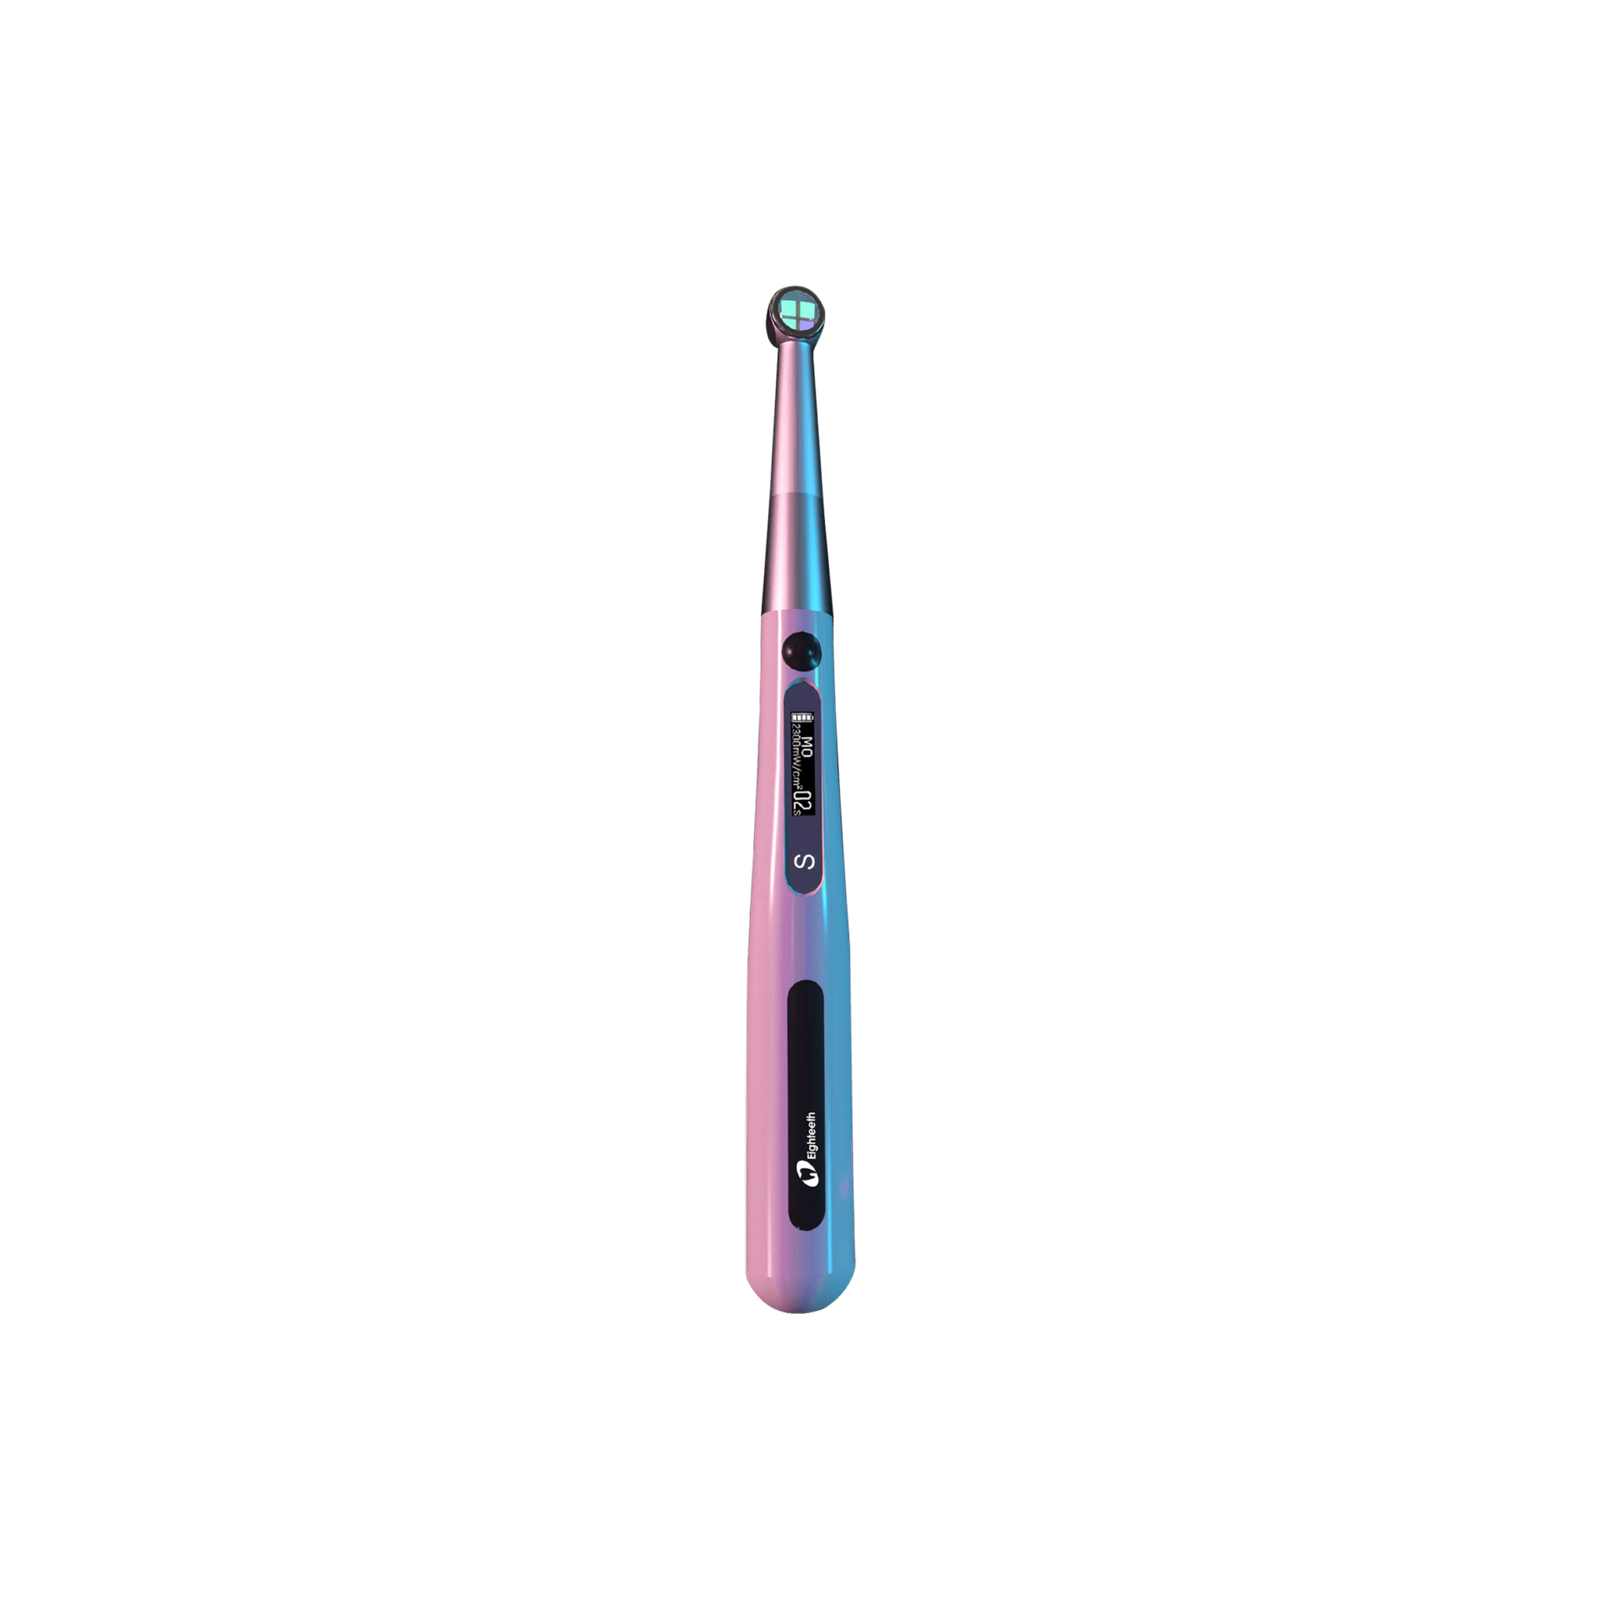 Buy Orikam Eighteeth Curing Pen LED Light Cure Online At Best Price